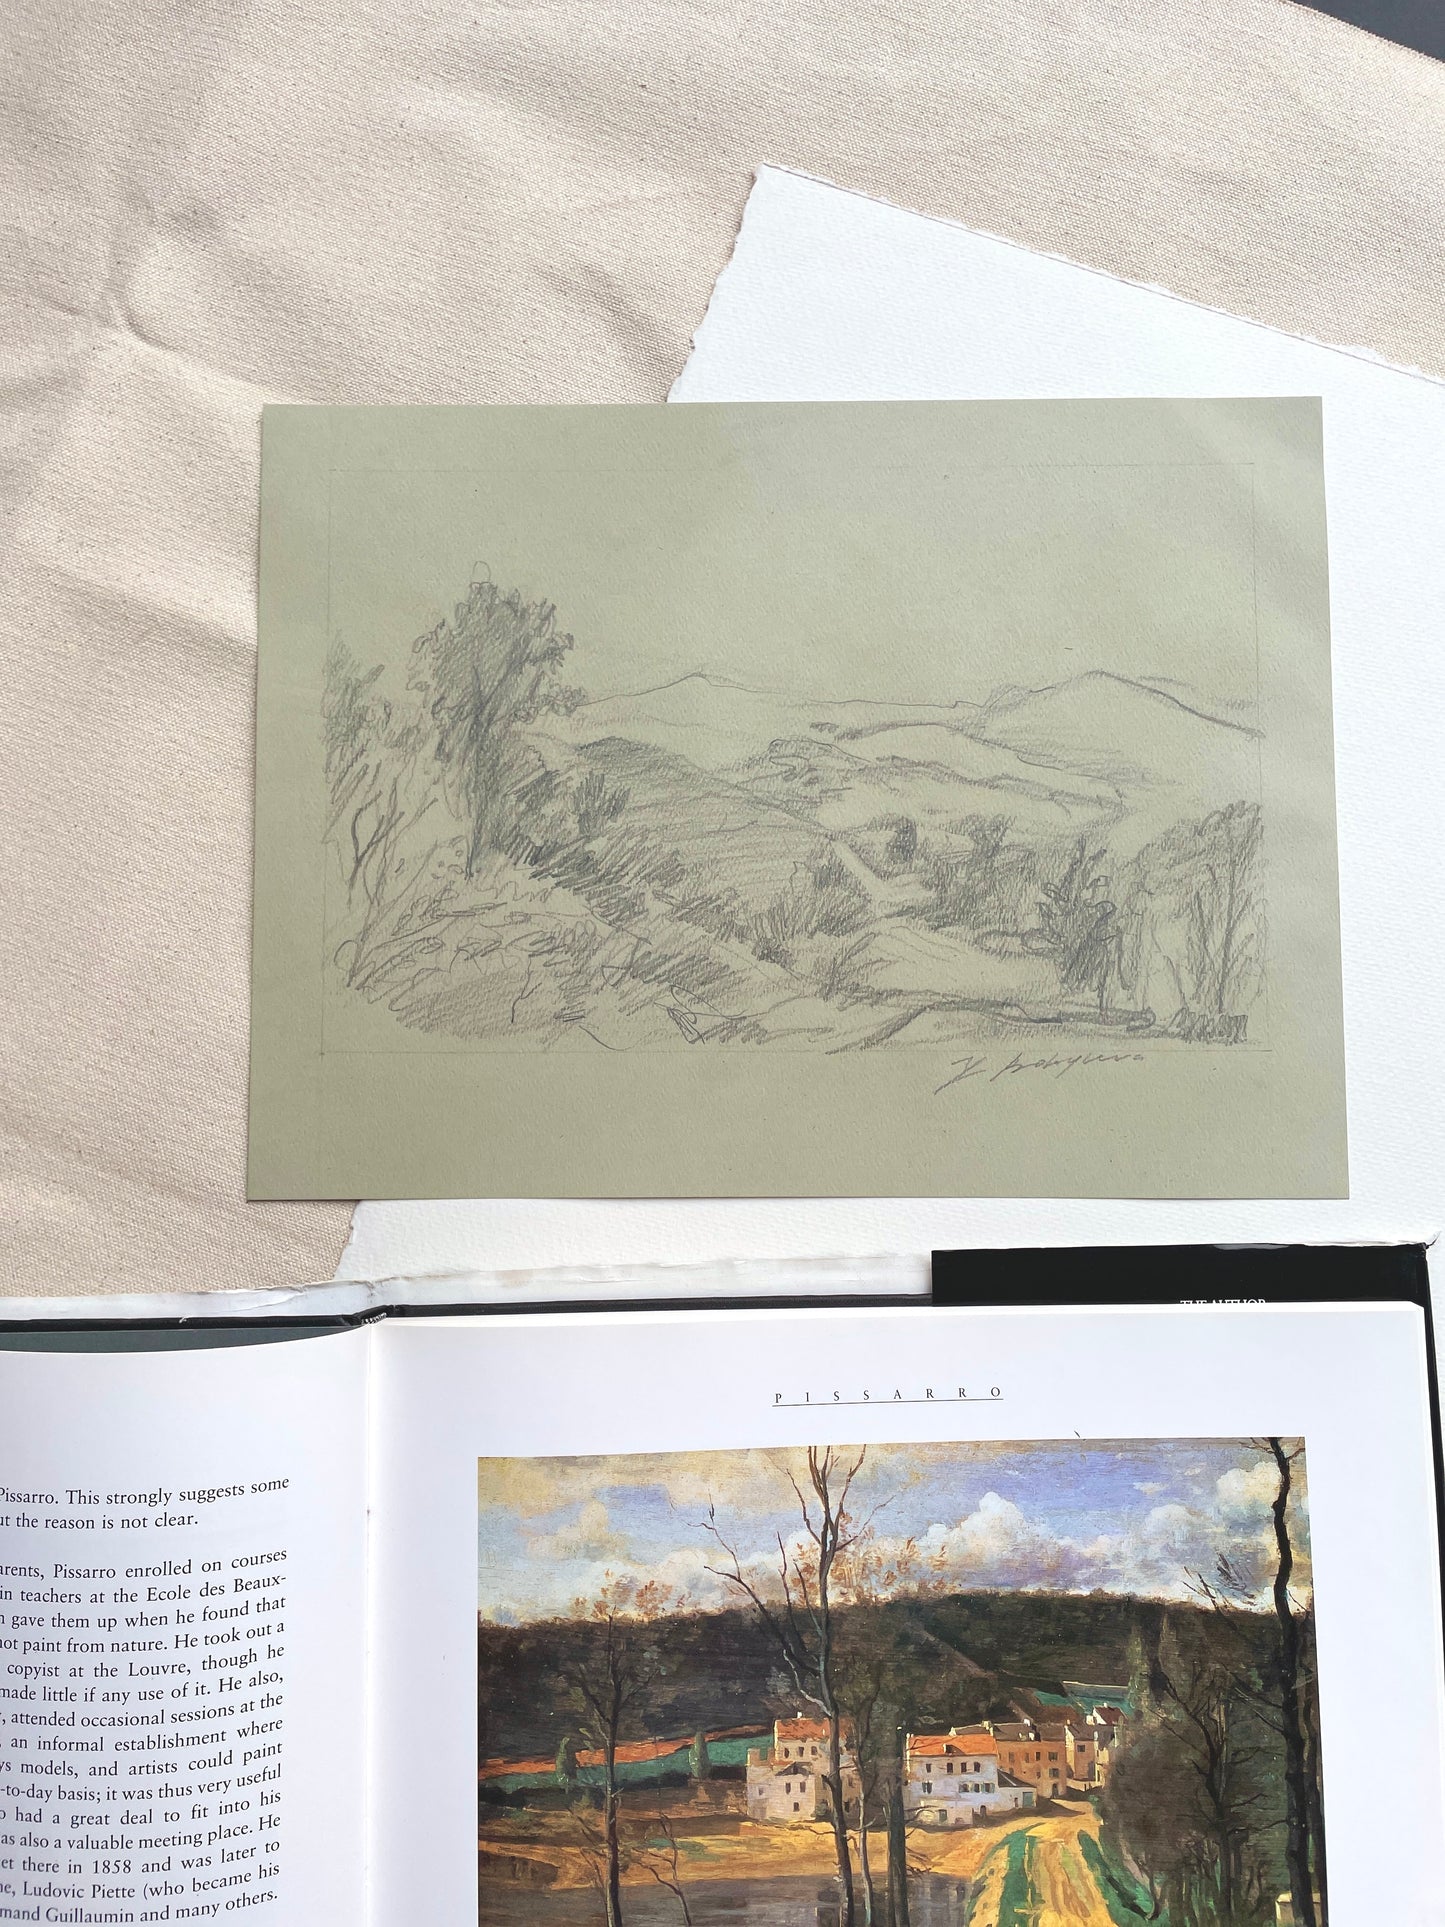 Peaceful landscape drawing in pencil and pastel